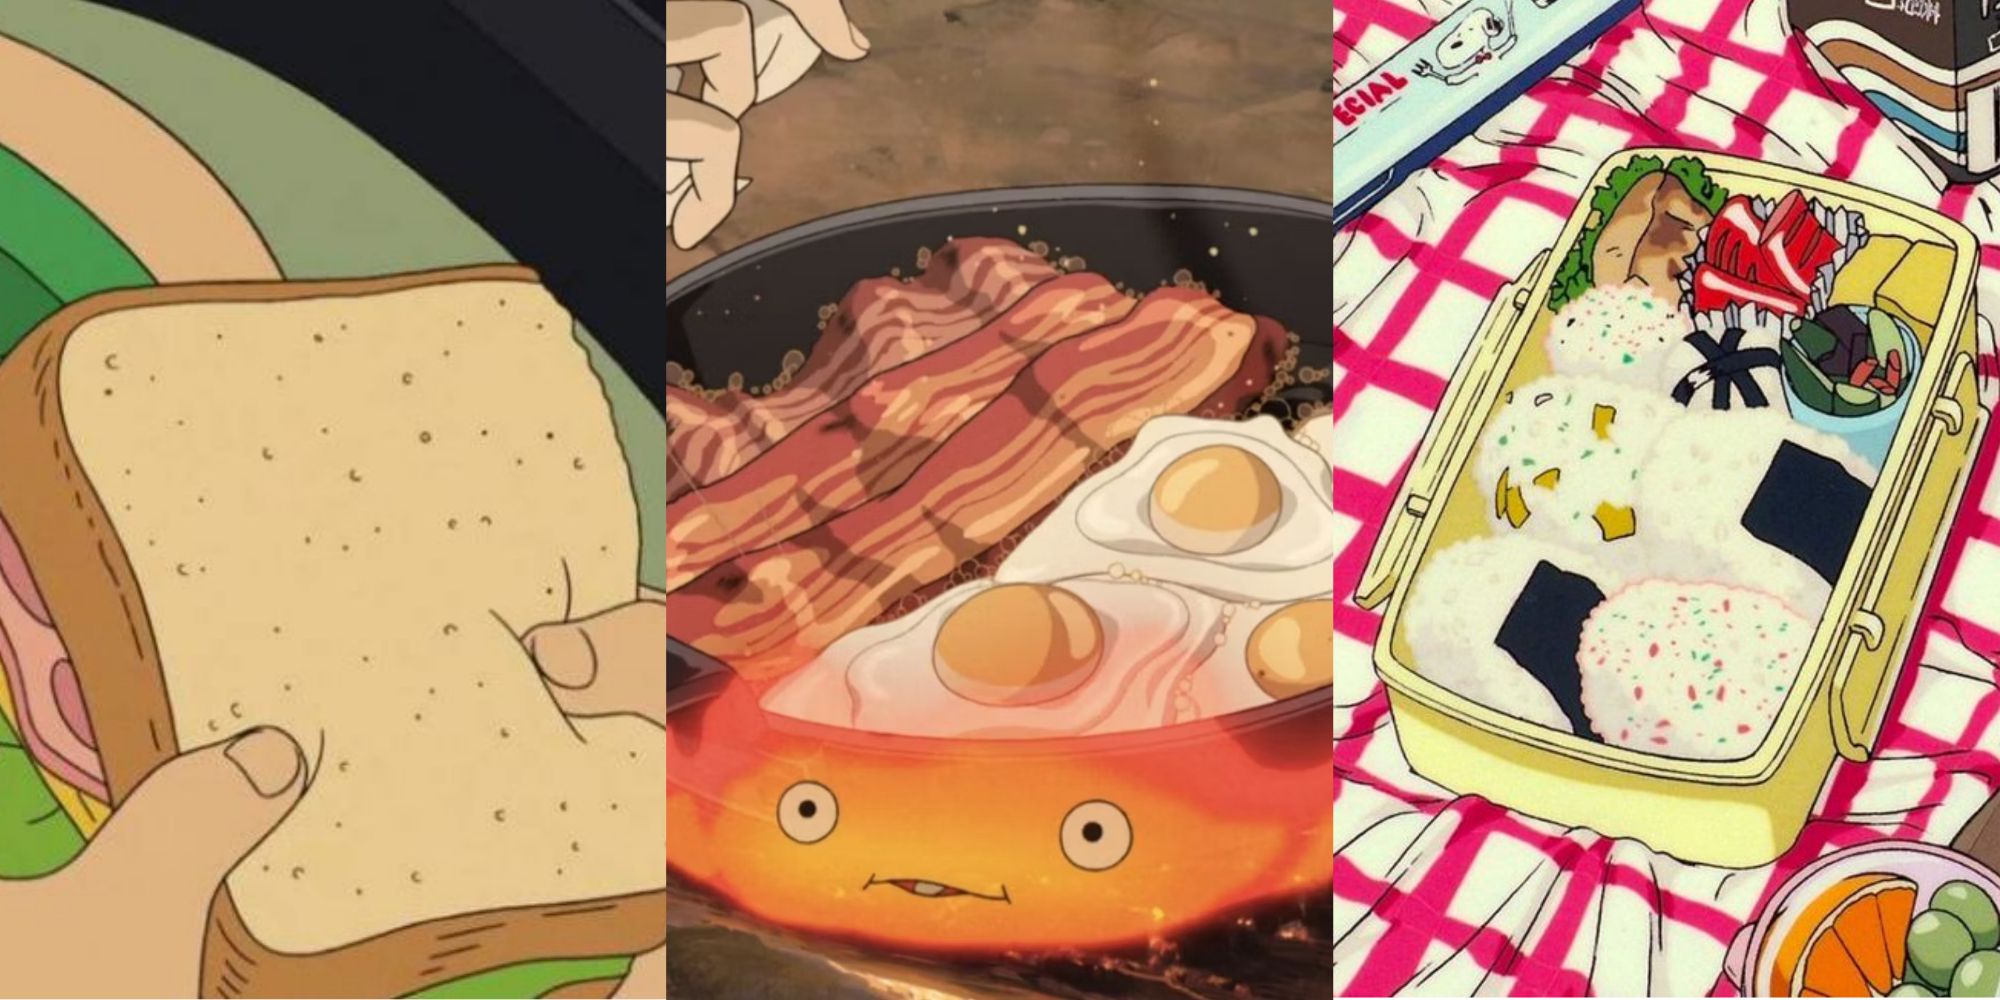 A sandwich from Ponyo, Calcifer cooking bacon and eggs from Howl's Moving Castle, and a bento from Ocean Waves